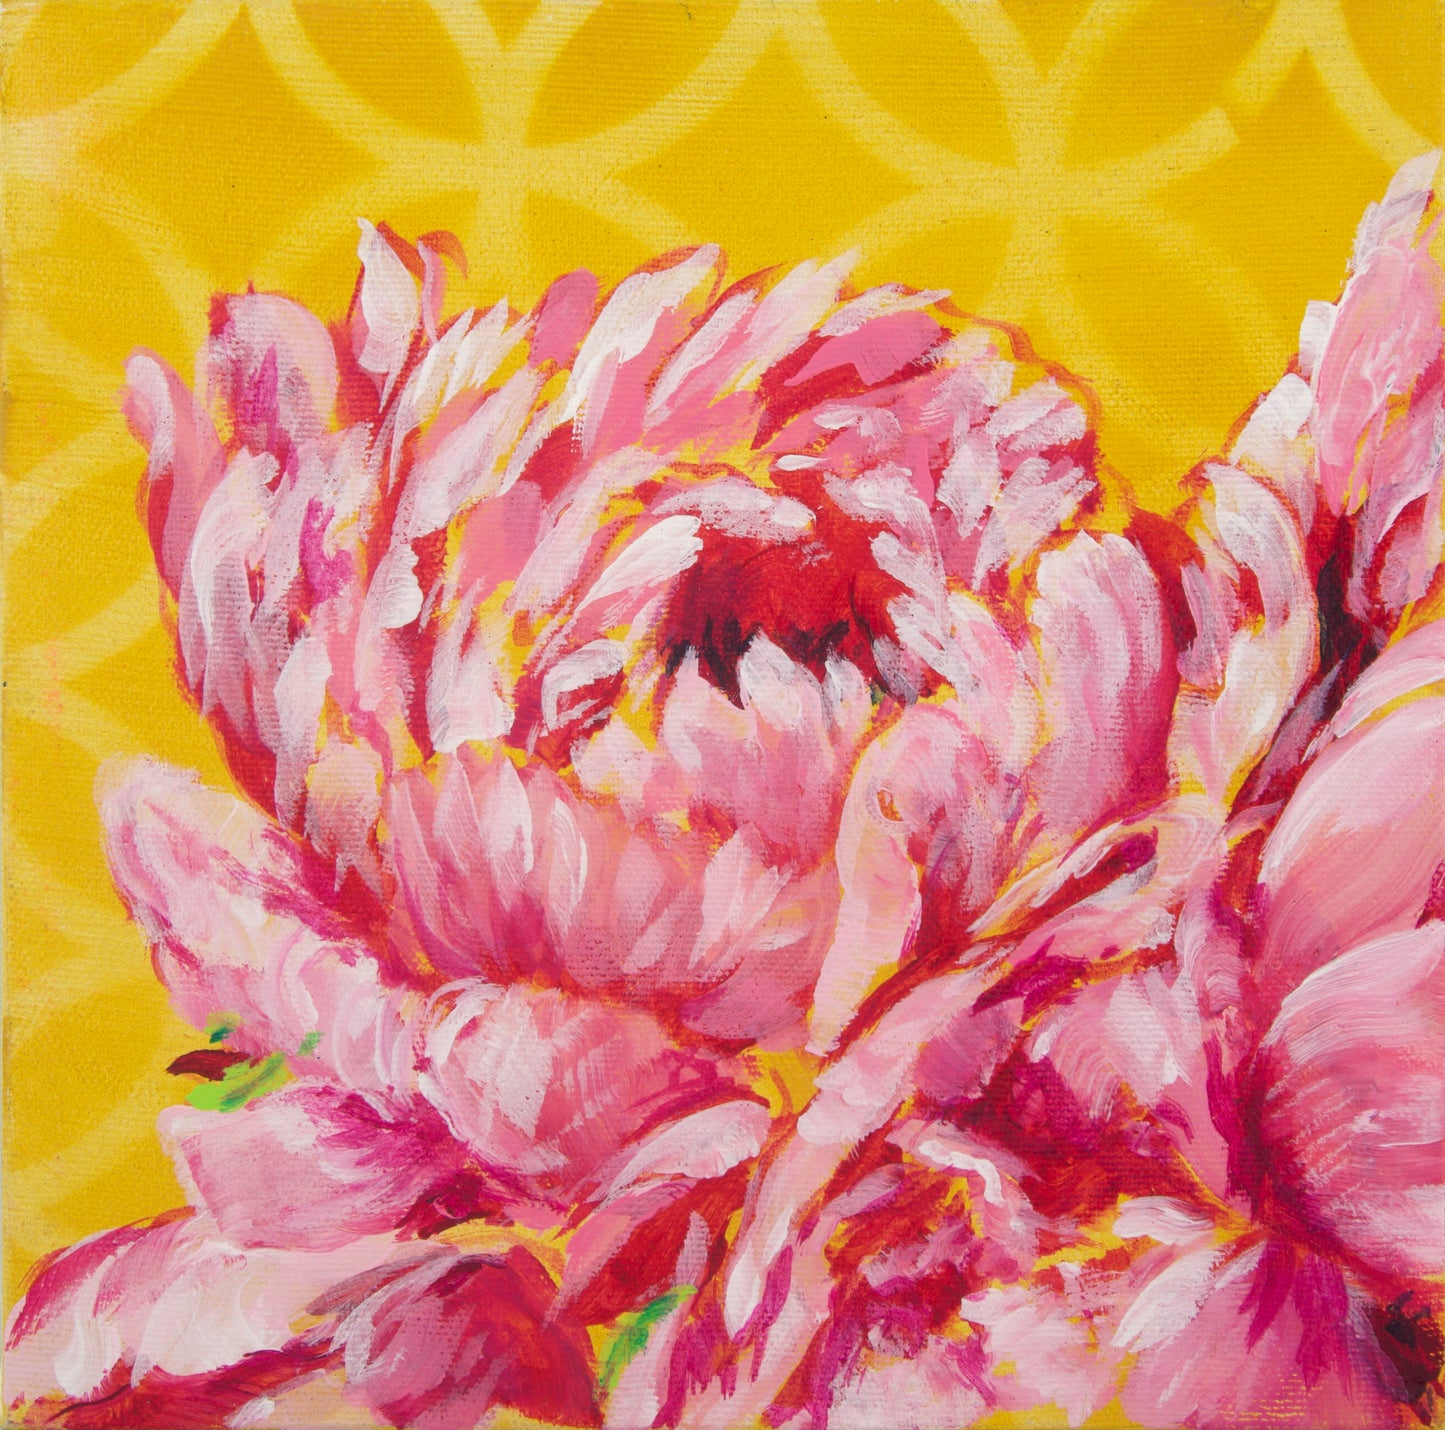 PEONY CLUSTER ON YELLOW | 8x8 | ORIGINAL ACRYLIC PAINTING ON CANVAS | Item number 19-26P